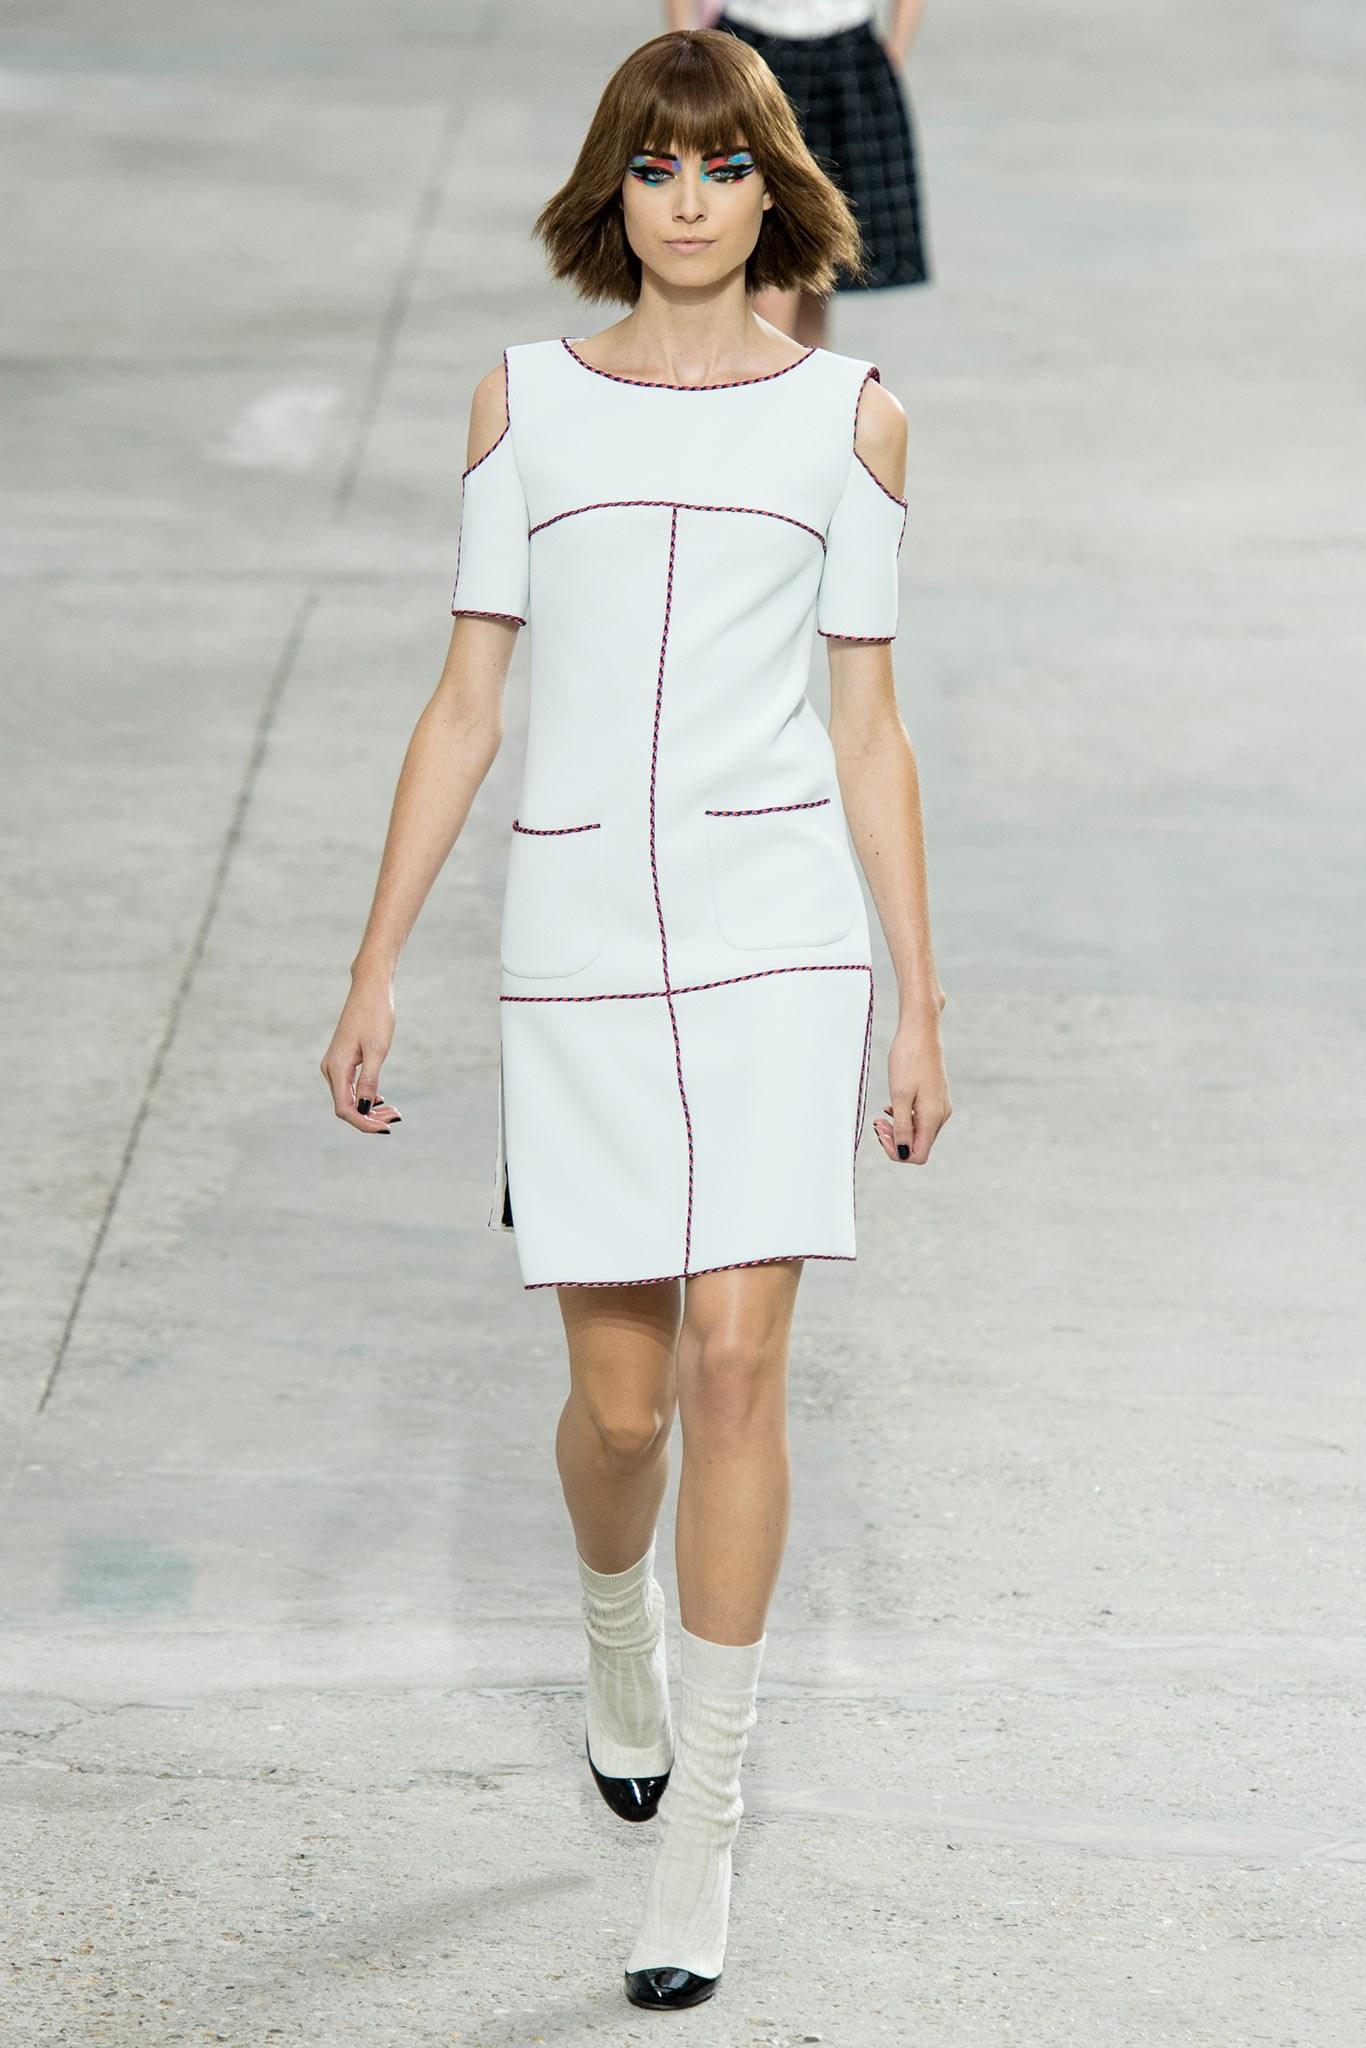 Chanel 14P Light Grey Cold Shoulder Runway Dress.  From the Spring 2014 runway collection.  Cut-out shoulder design, very light dove grey color, trimmed with multicolor piping. Centre back zipper, straight cut body, front hip pockets. Size FR 38